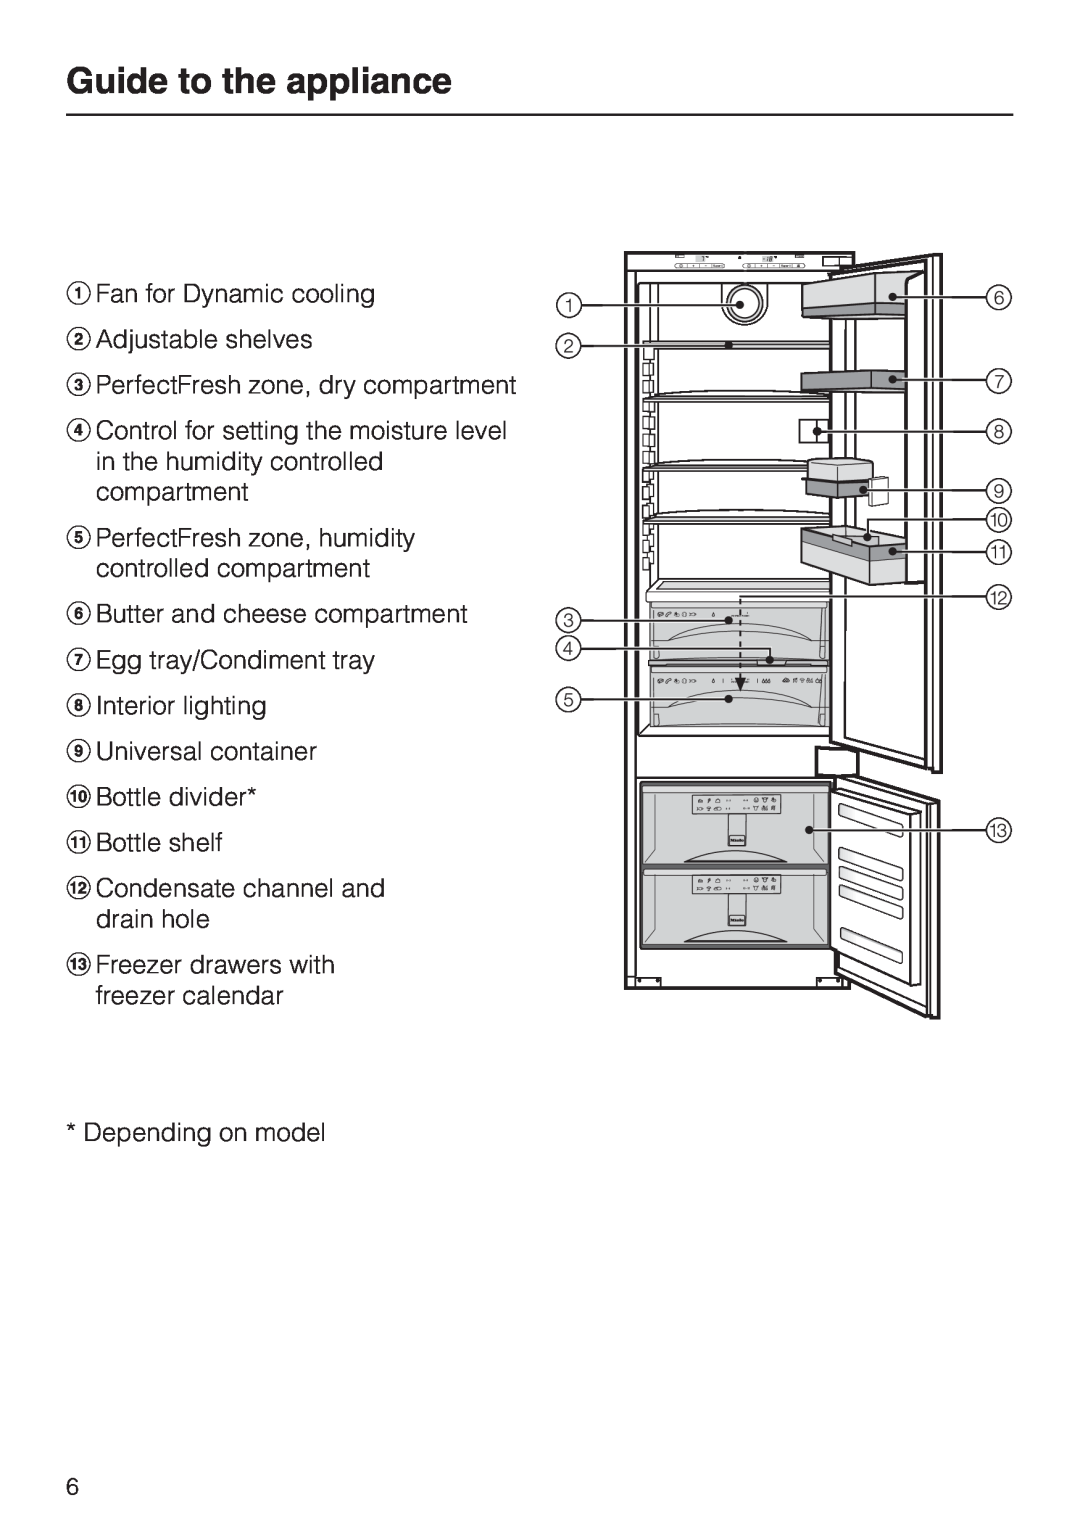 Miele KF 9757 ID installation instructions Guide to the appliance, aFan for Dynamic cooling bAdjustable shelves 